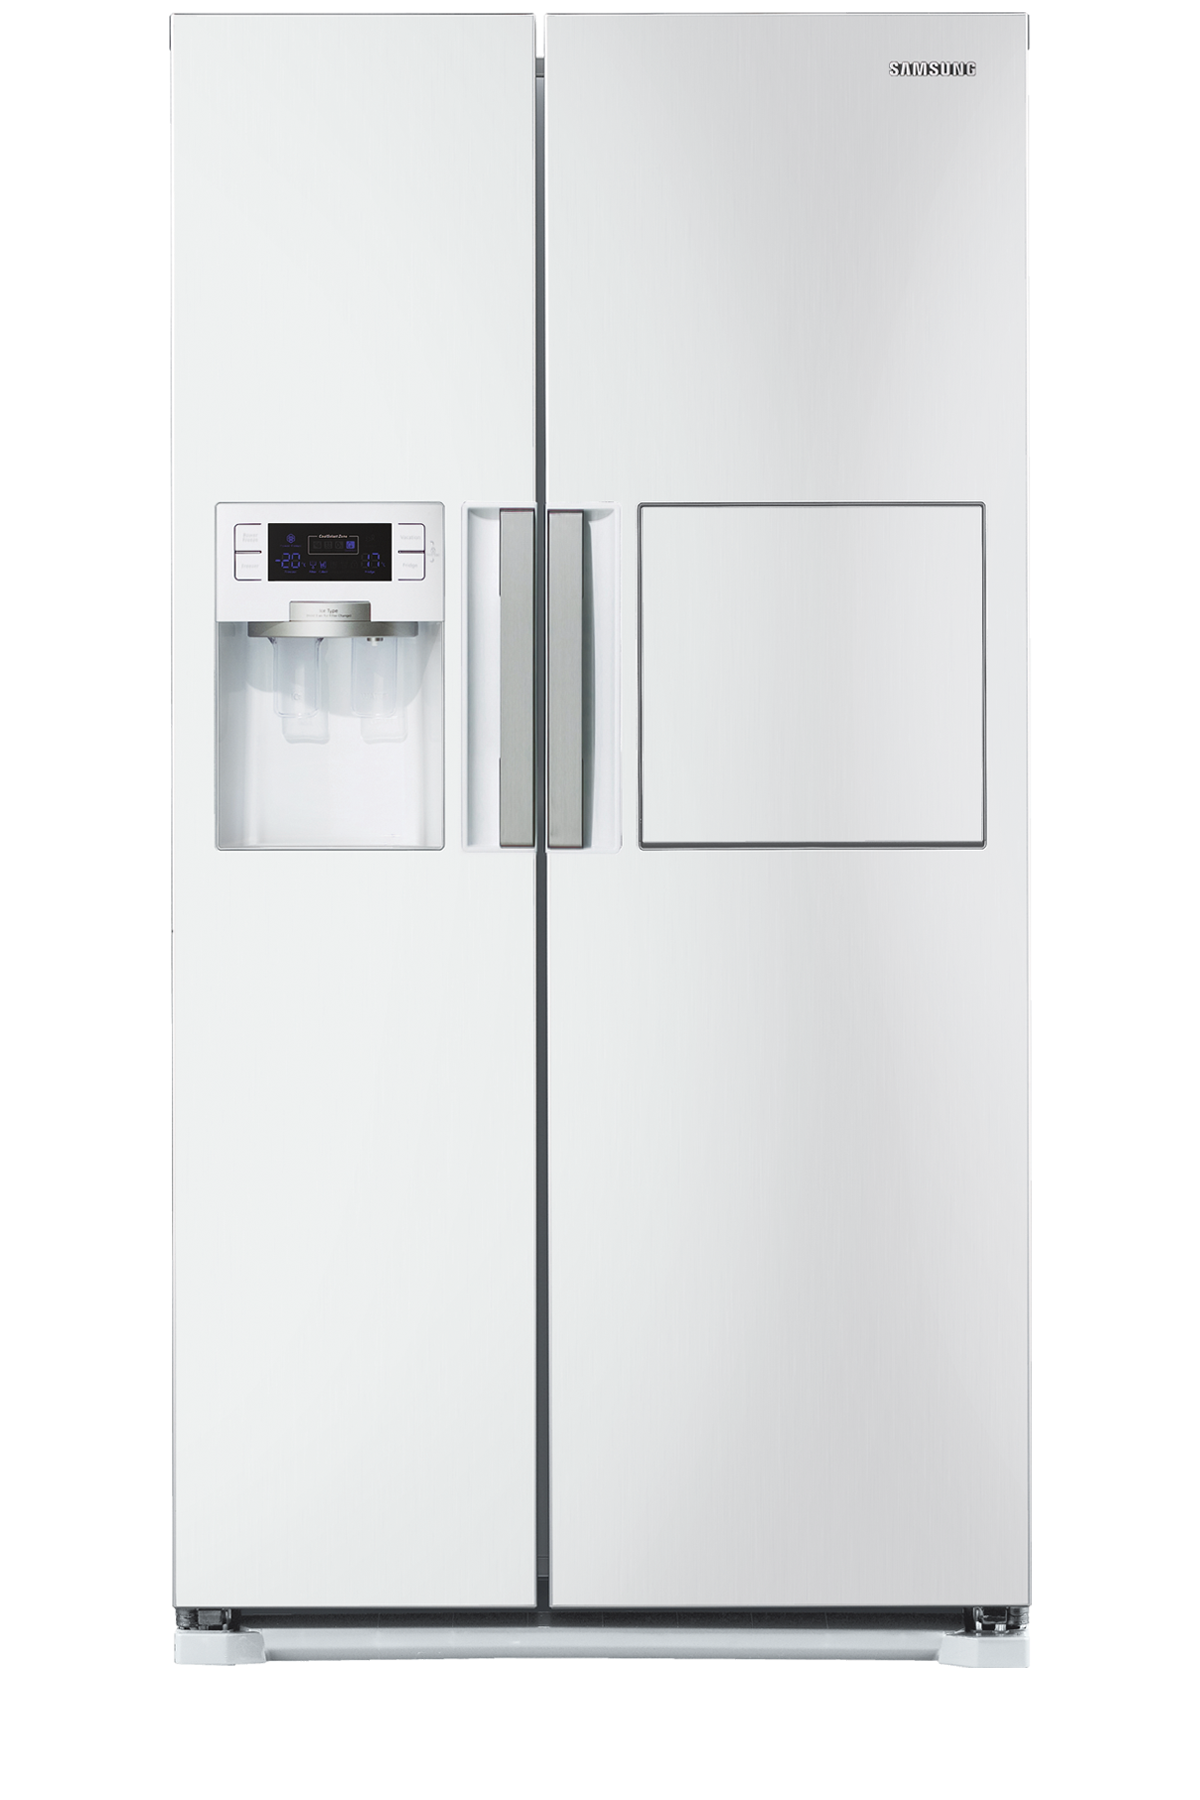 RSH7PNSW1 H Series Side By Side Refrigerator | SAMSUNG South Africa1200 x 1800